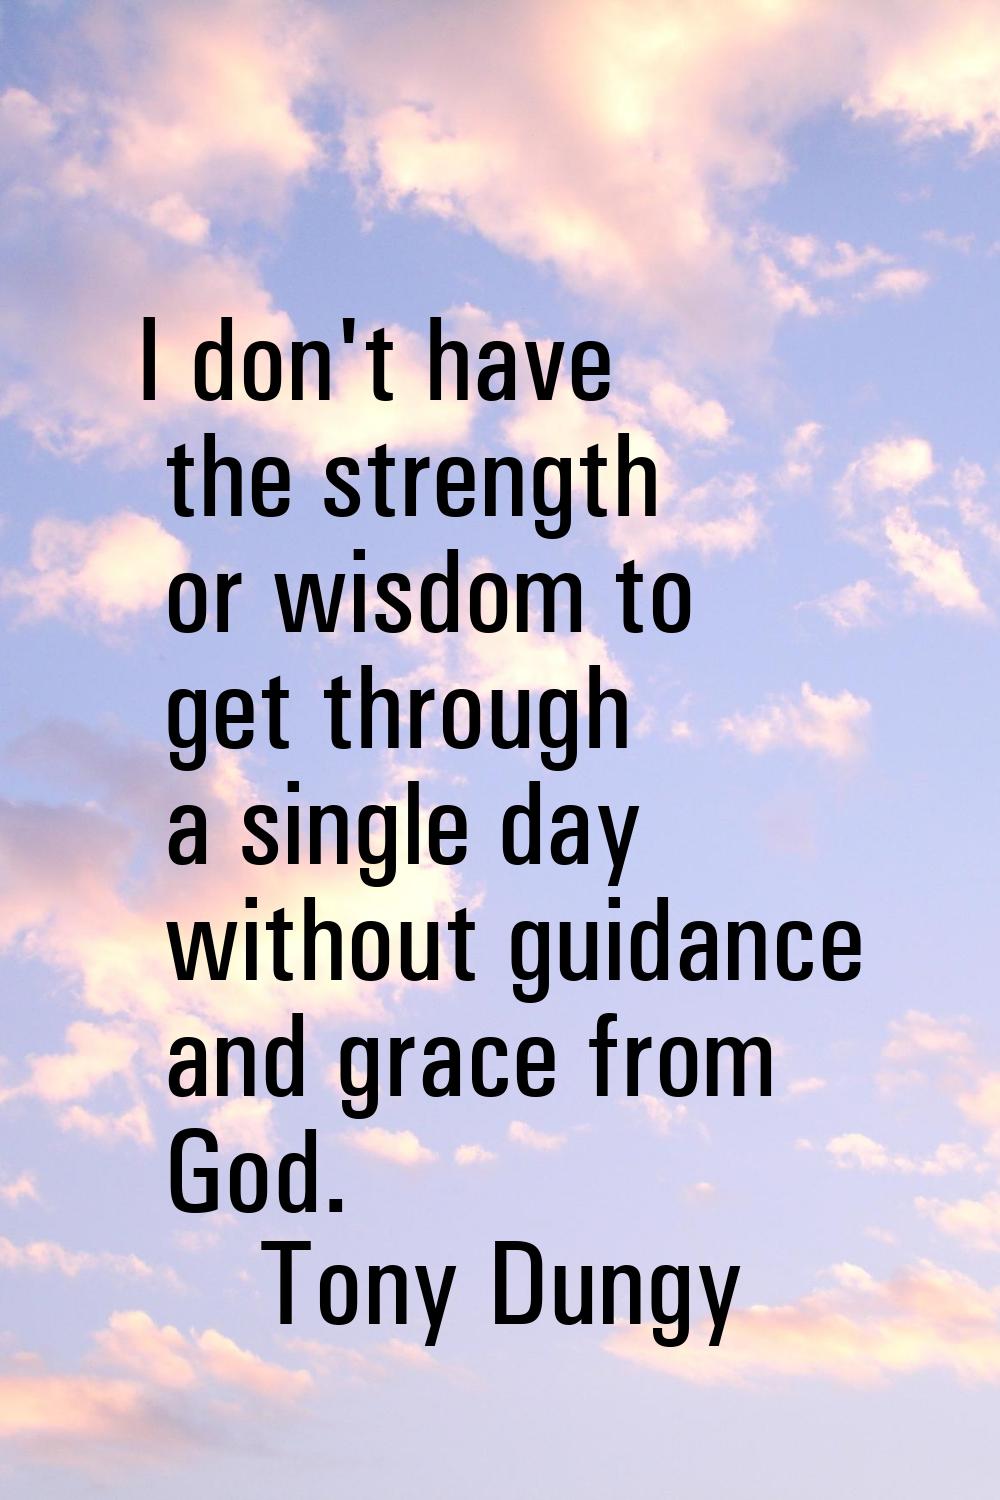 I don't have the strength or wisdom to get through a single day without guidance and grace from God